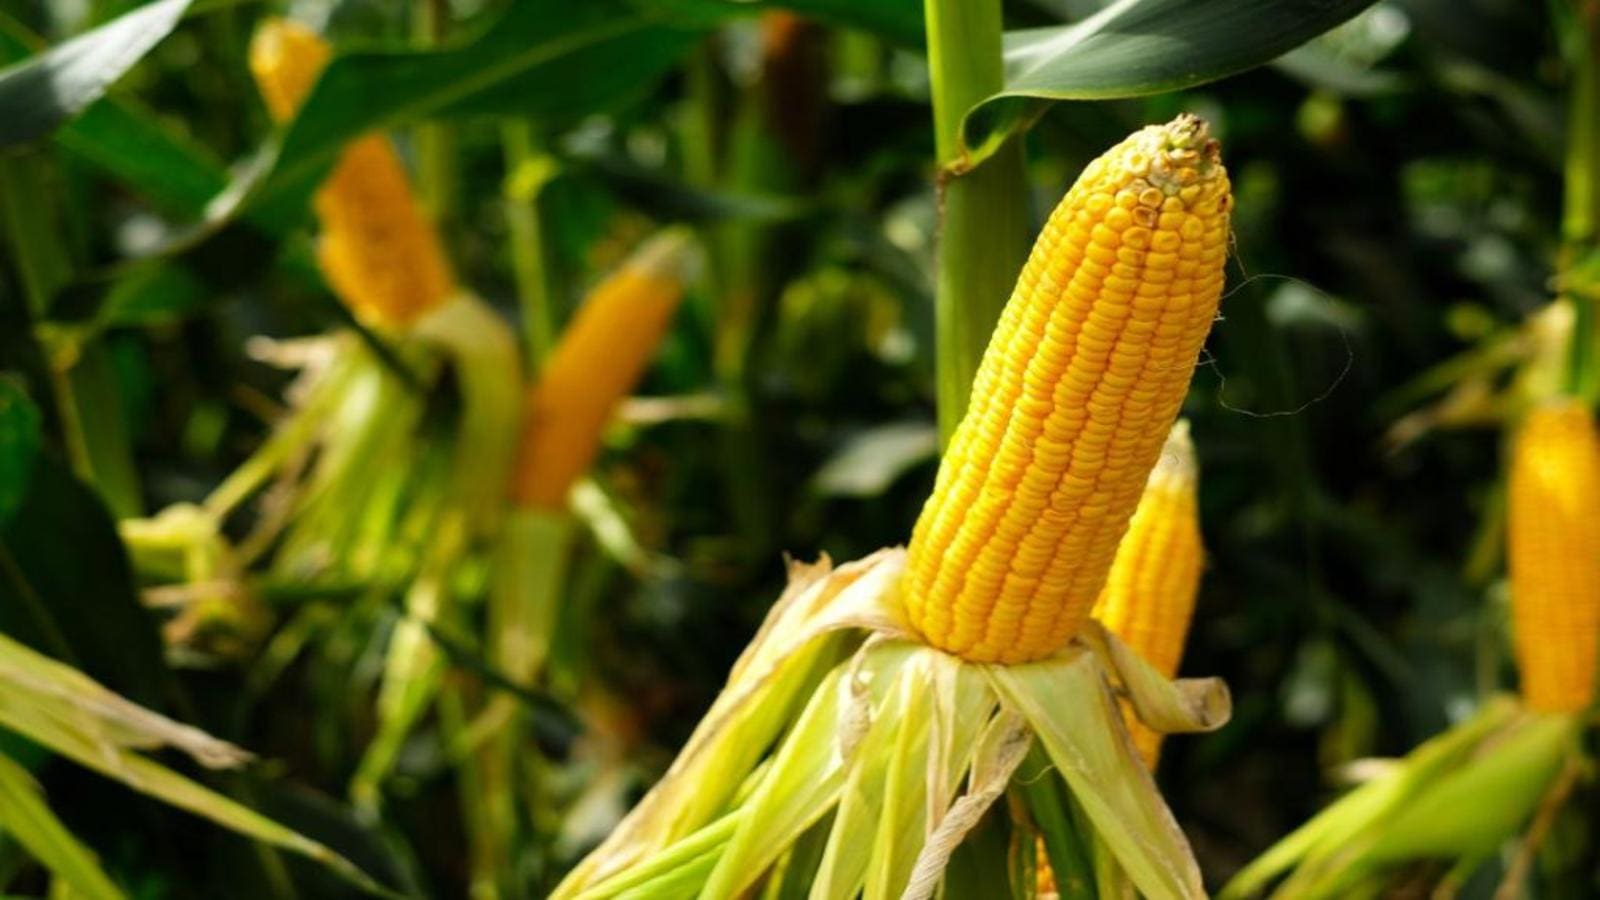 Nigeria consents open cultivation of genetically modified TELA maize with drought, pest resistance attributes